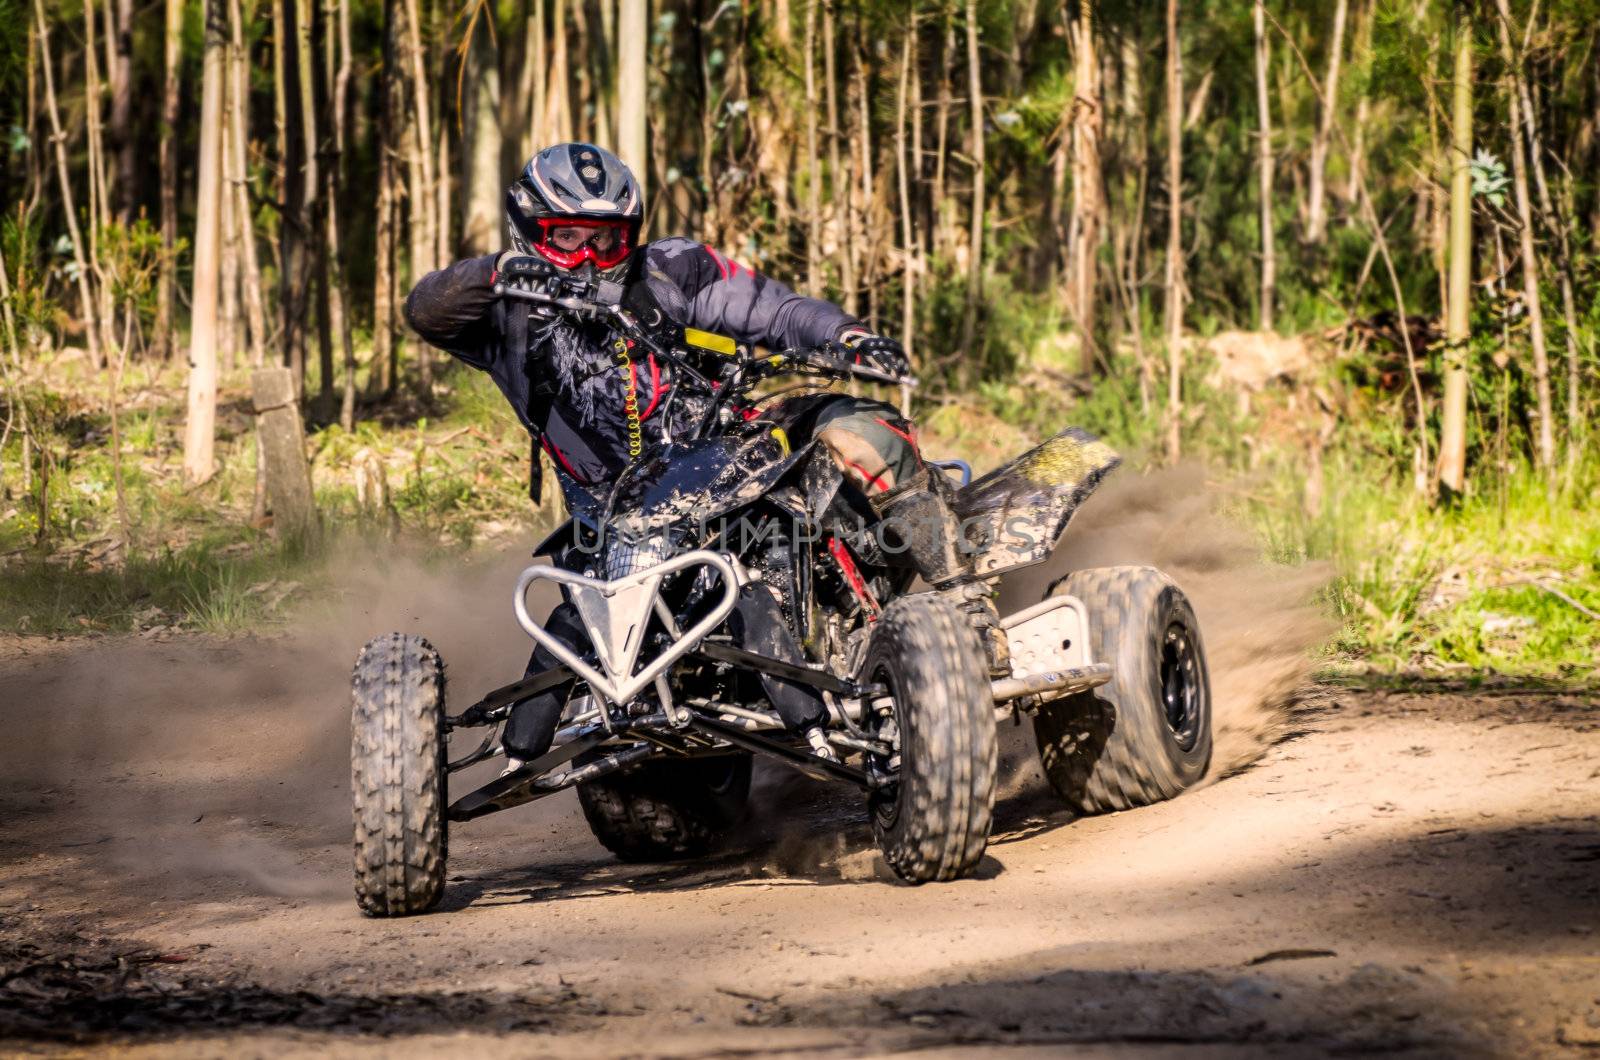 ATV racer takes a turn during a race.  by homydesign